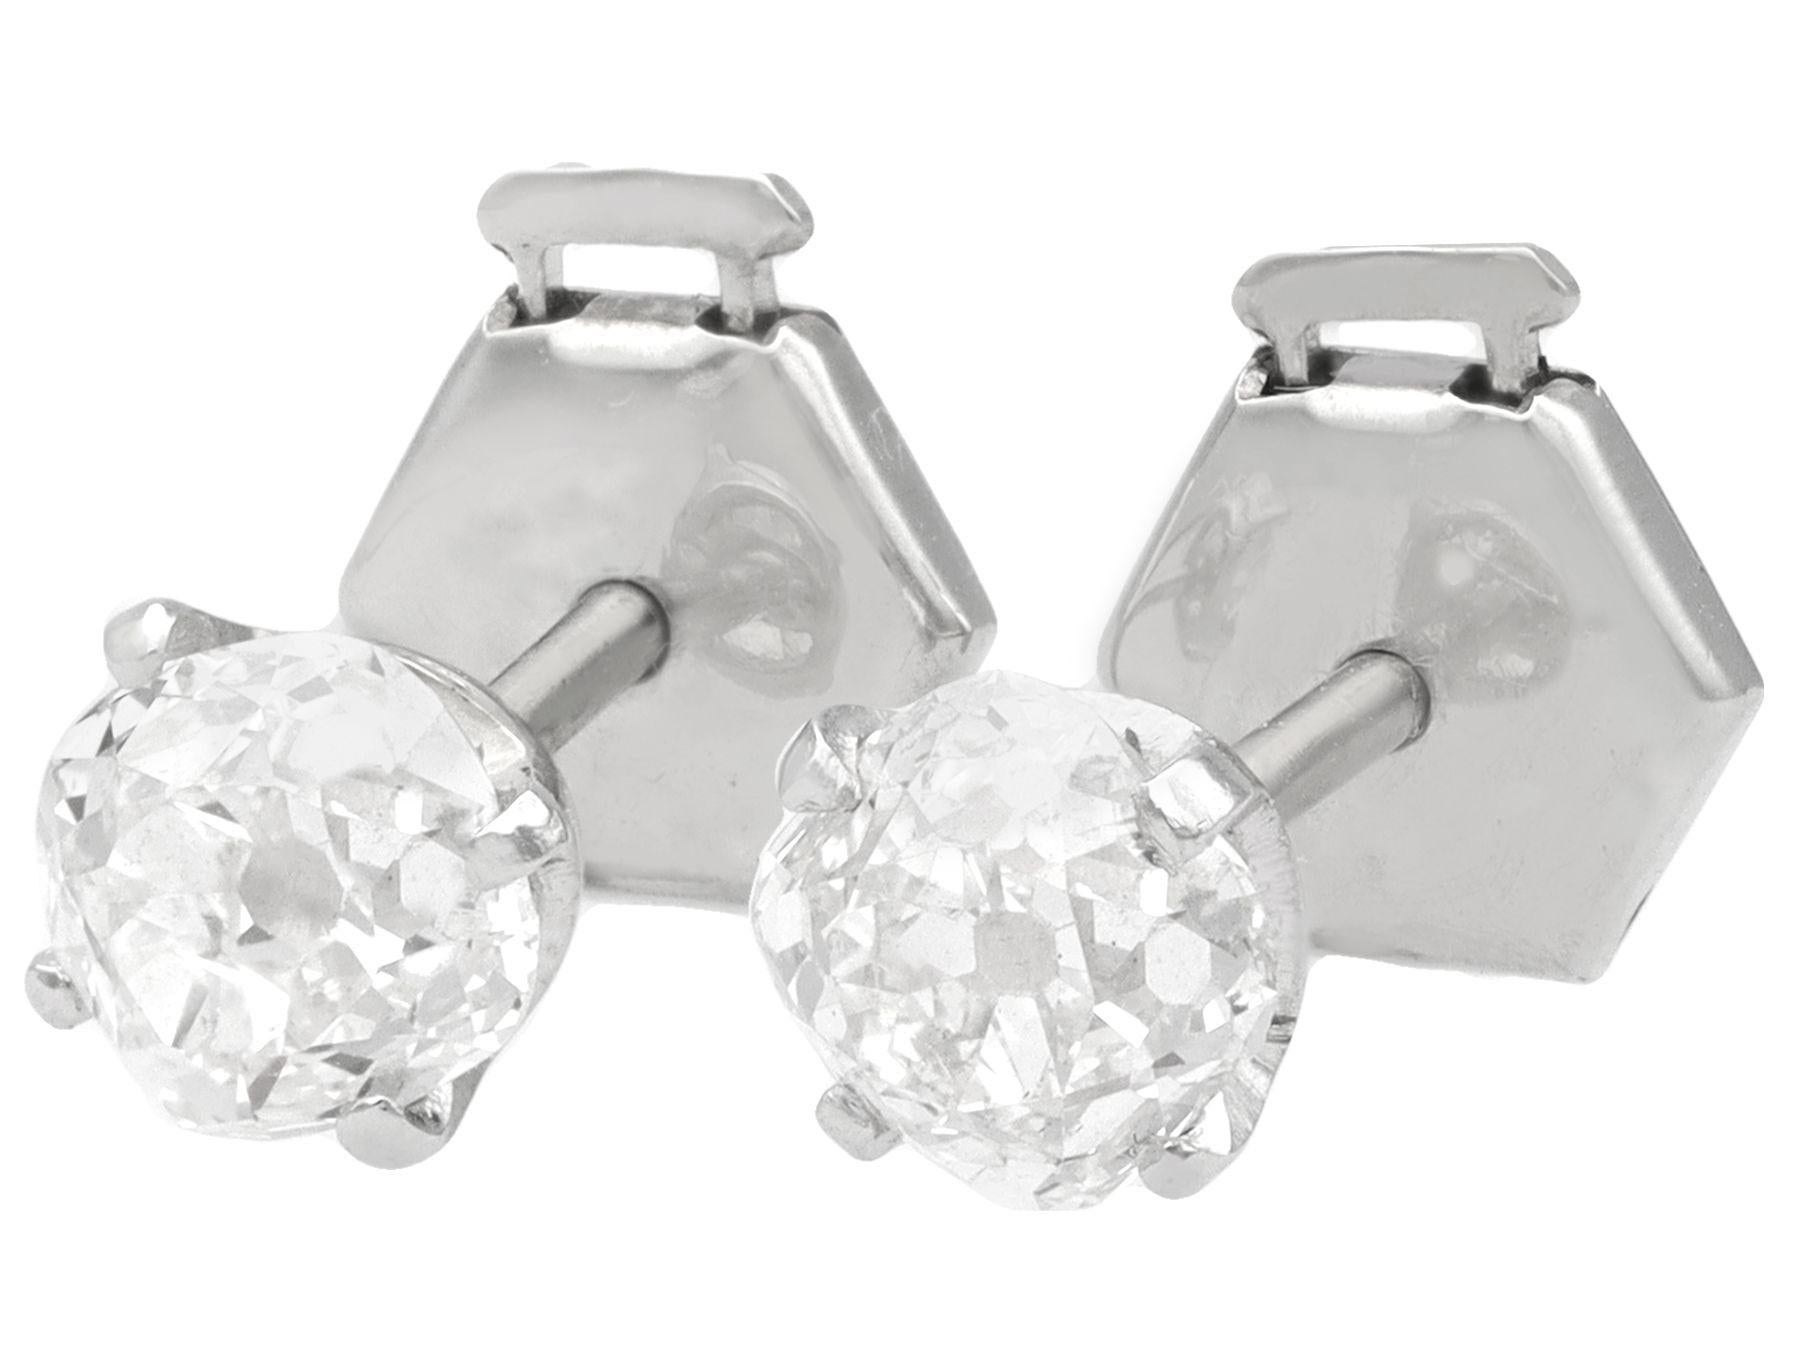 A fine and impressive pair of antique 1.61 carat diamond and contemporary 18 karat white gold, platinum set stud earrings; part of our diverse jewelry and estate jewelry collections

These fine and impressive diamond stud earrings have been crafted